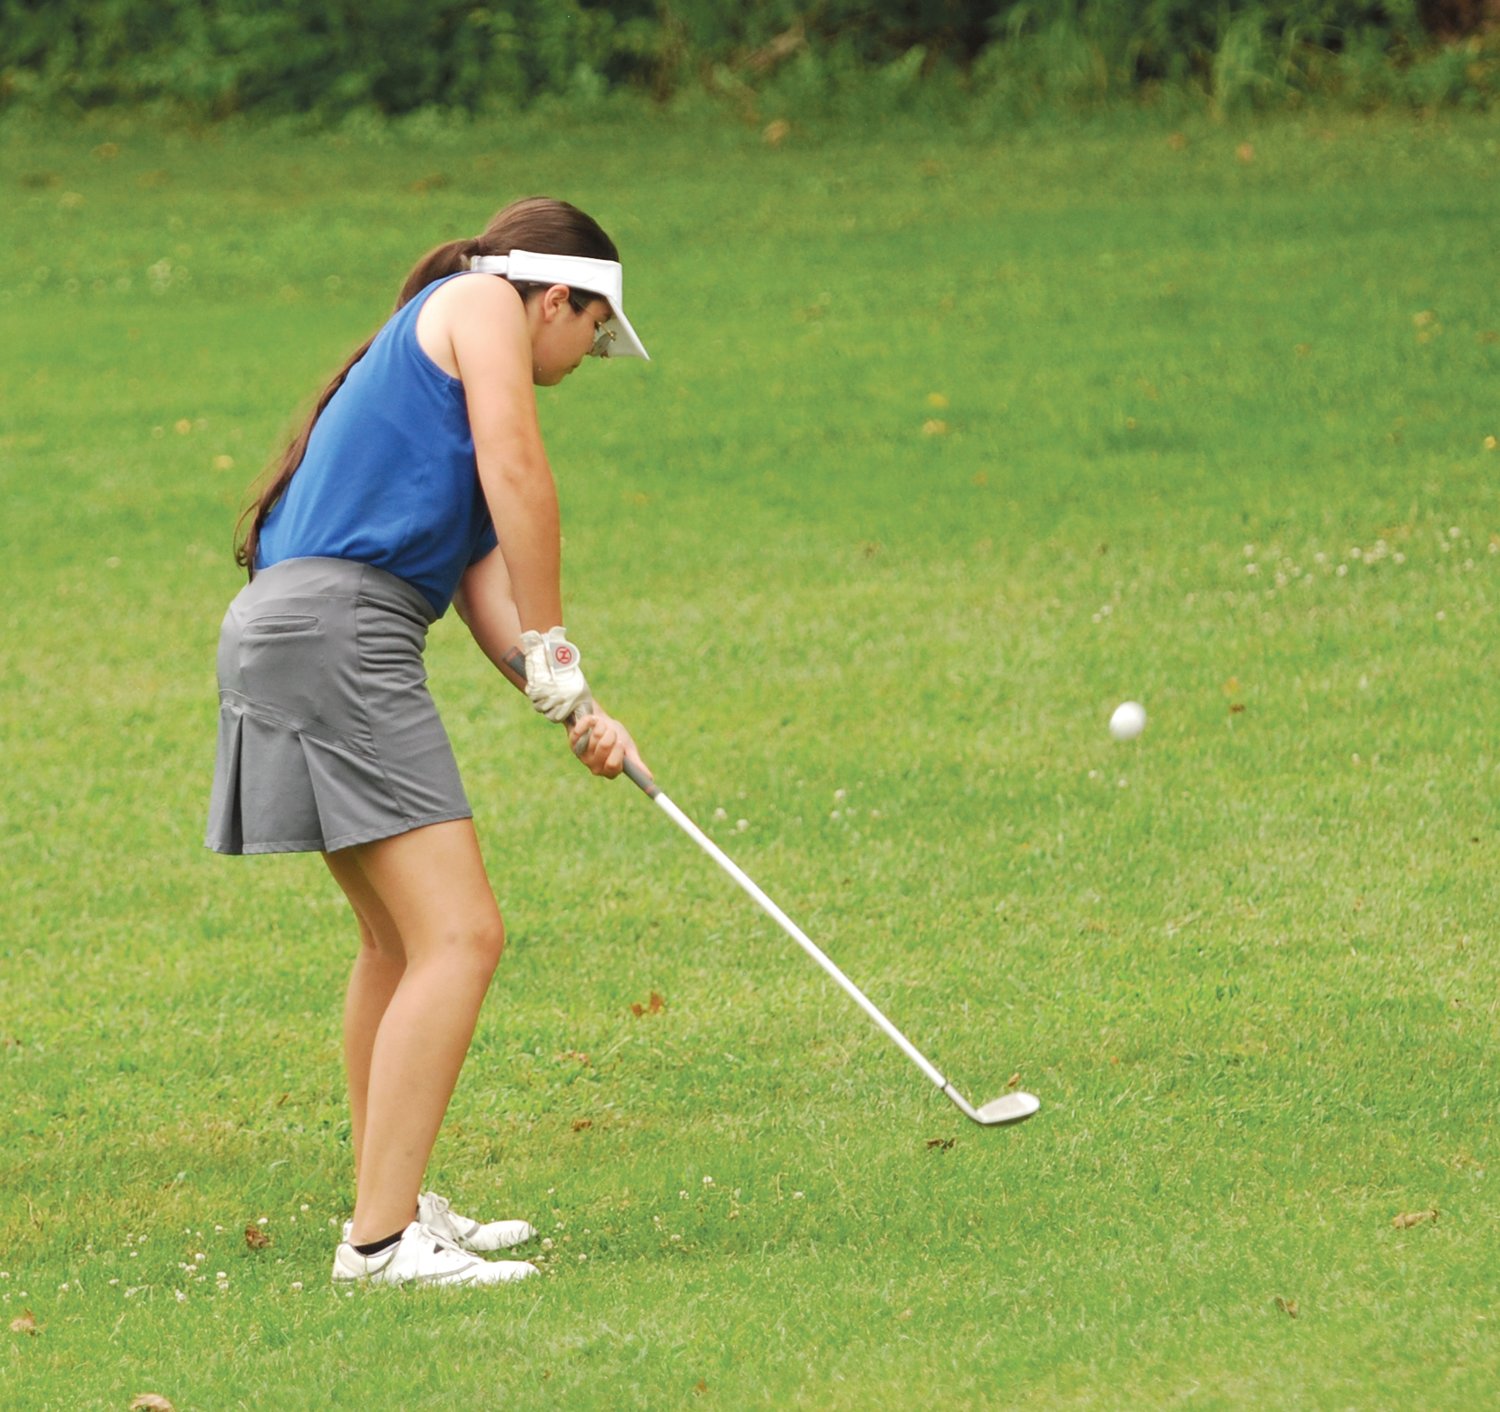 Crawfordsville's Evie Redding chips a shot toward the green on Thursday evening at Crawfordsville Municipal Golf Course. The senior fired a 55.